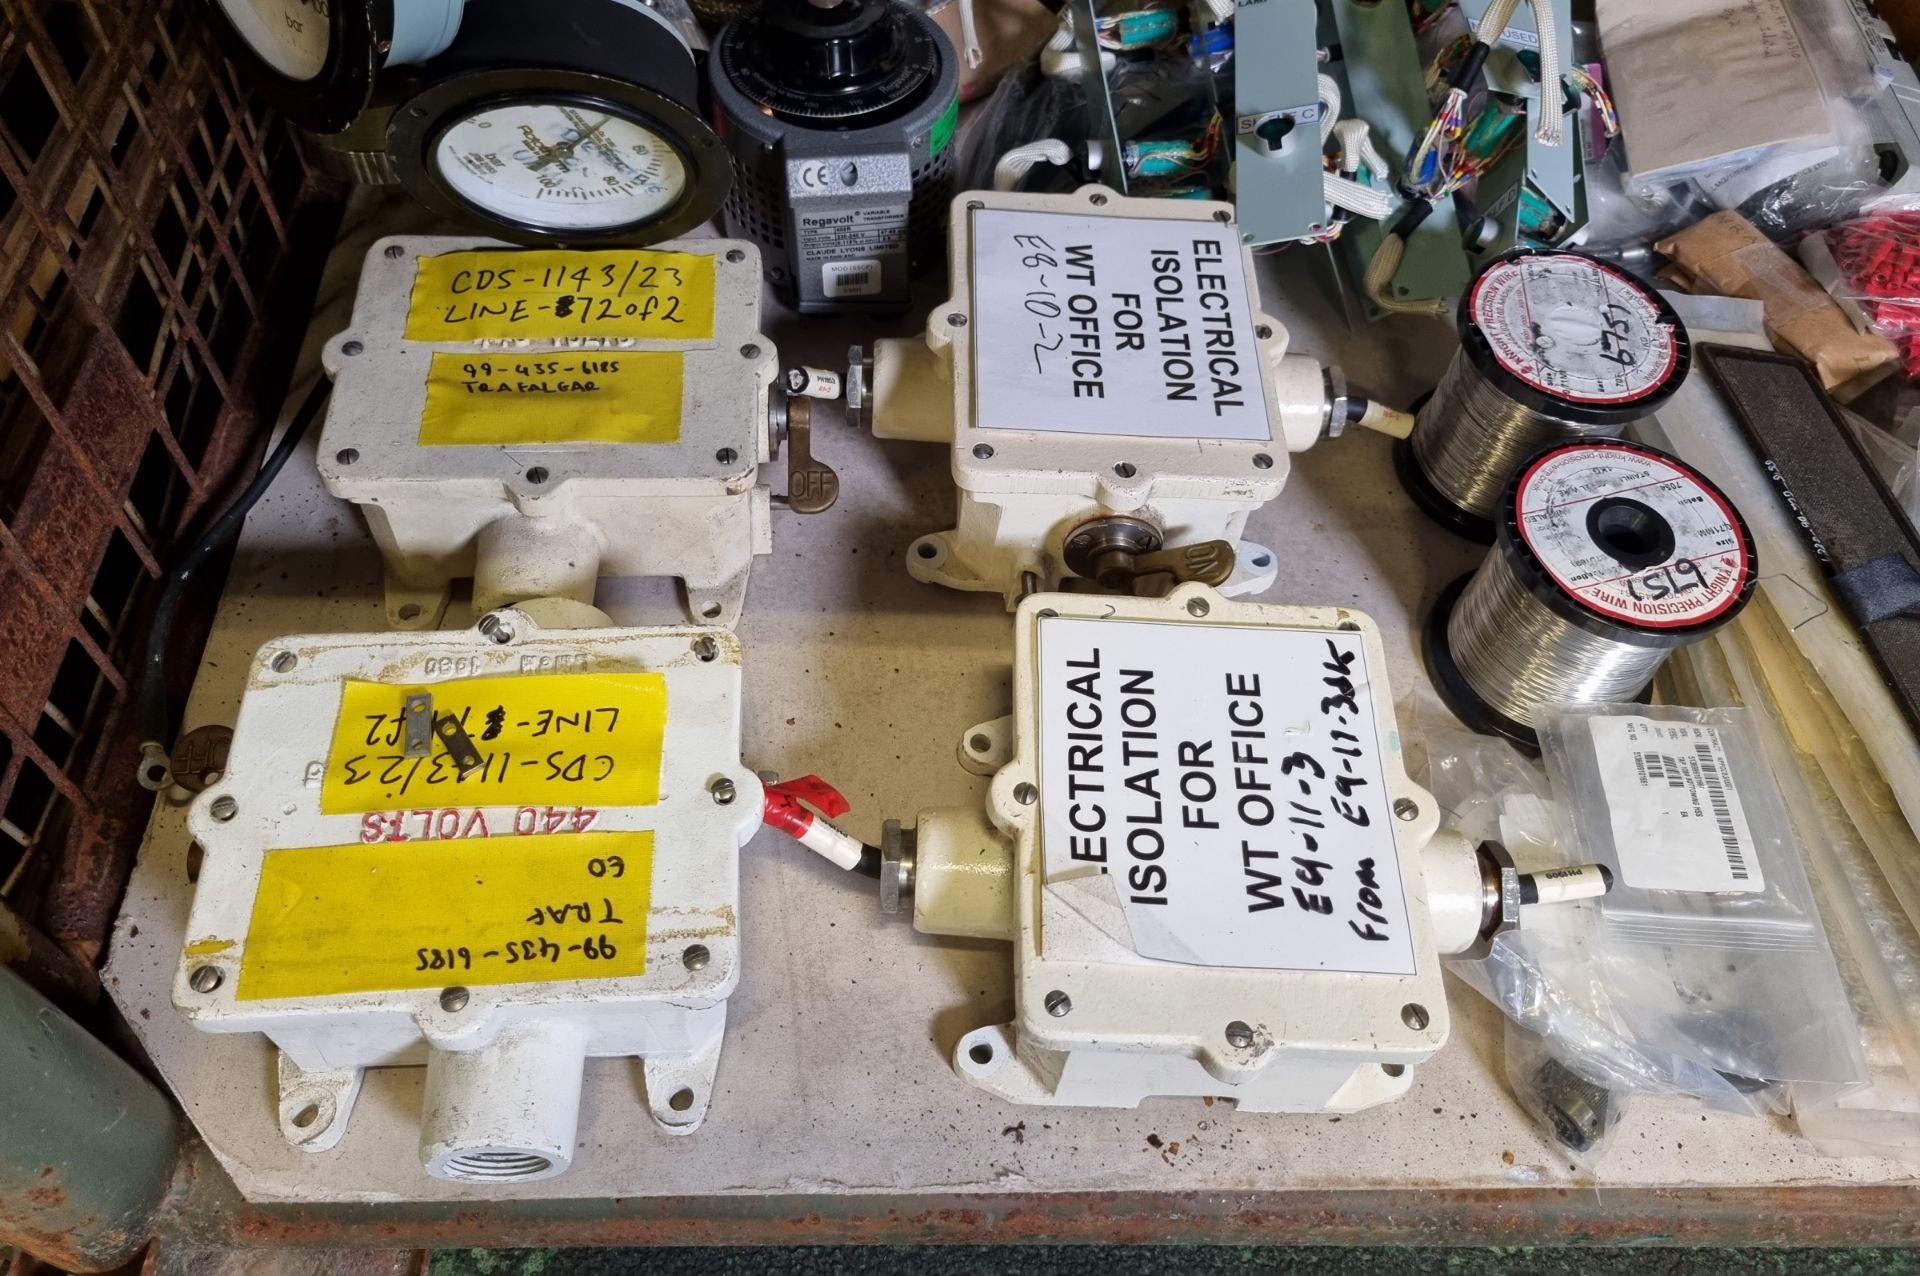 Workshop consumables - electric isolator switches, pressure gauges, fuse cartridges, transformer - Image 2 of 9